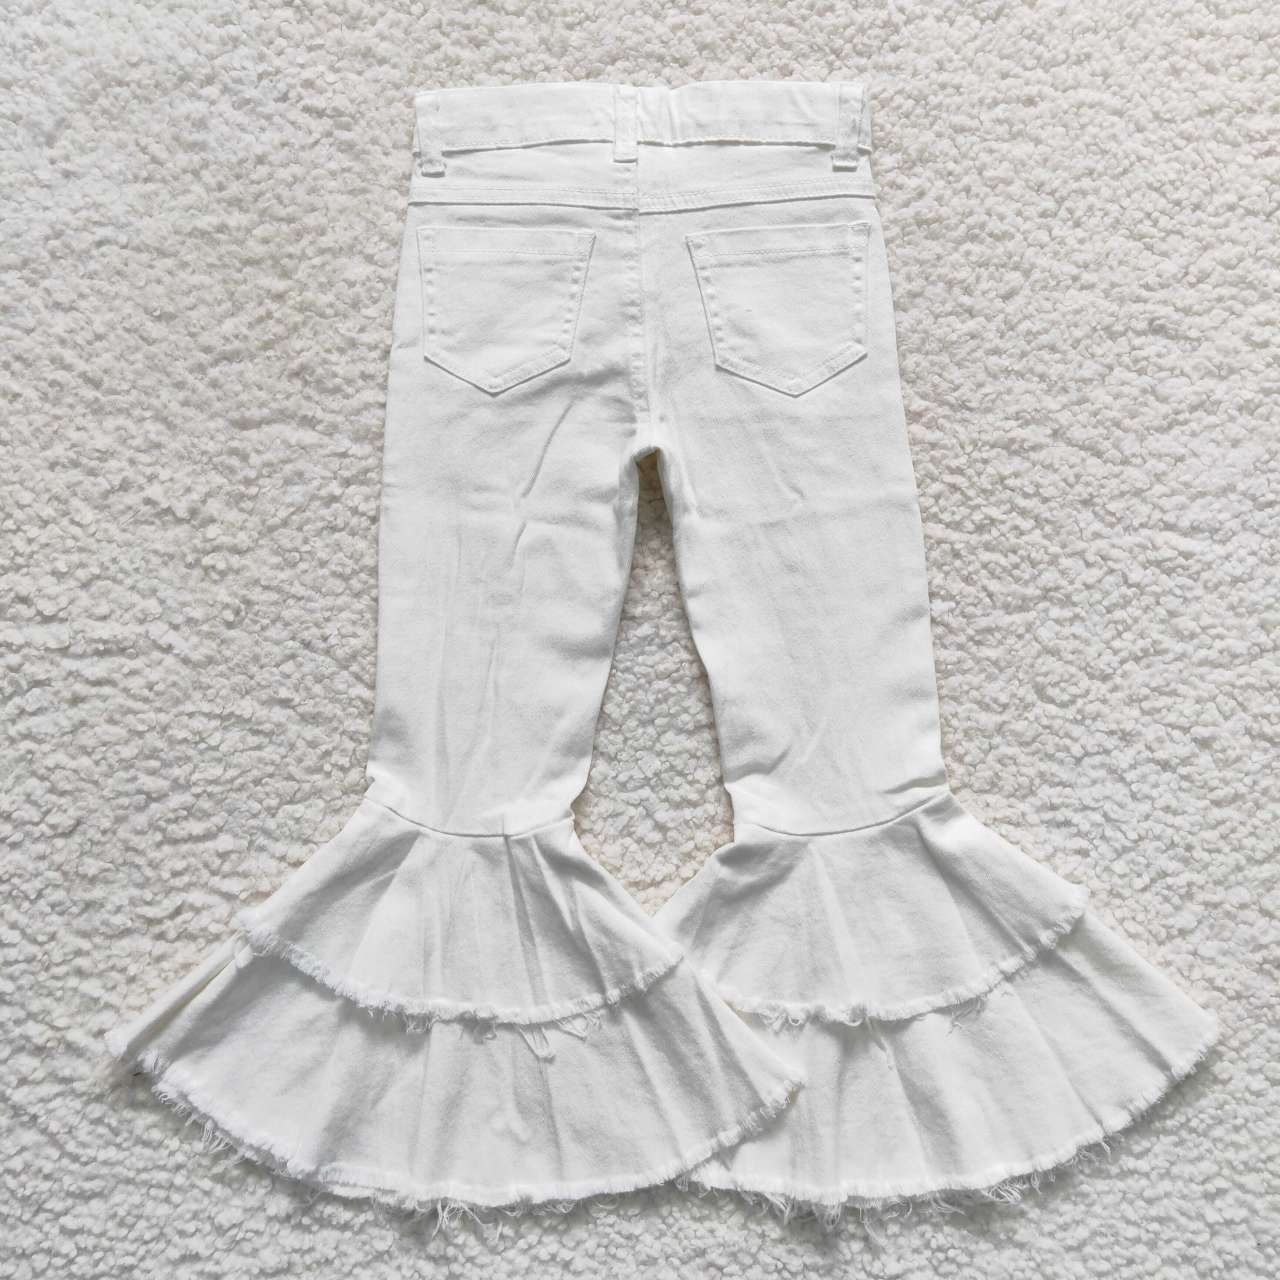 white flare jeans girl denim pants with hole